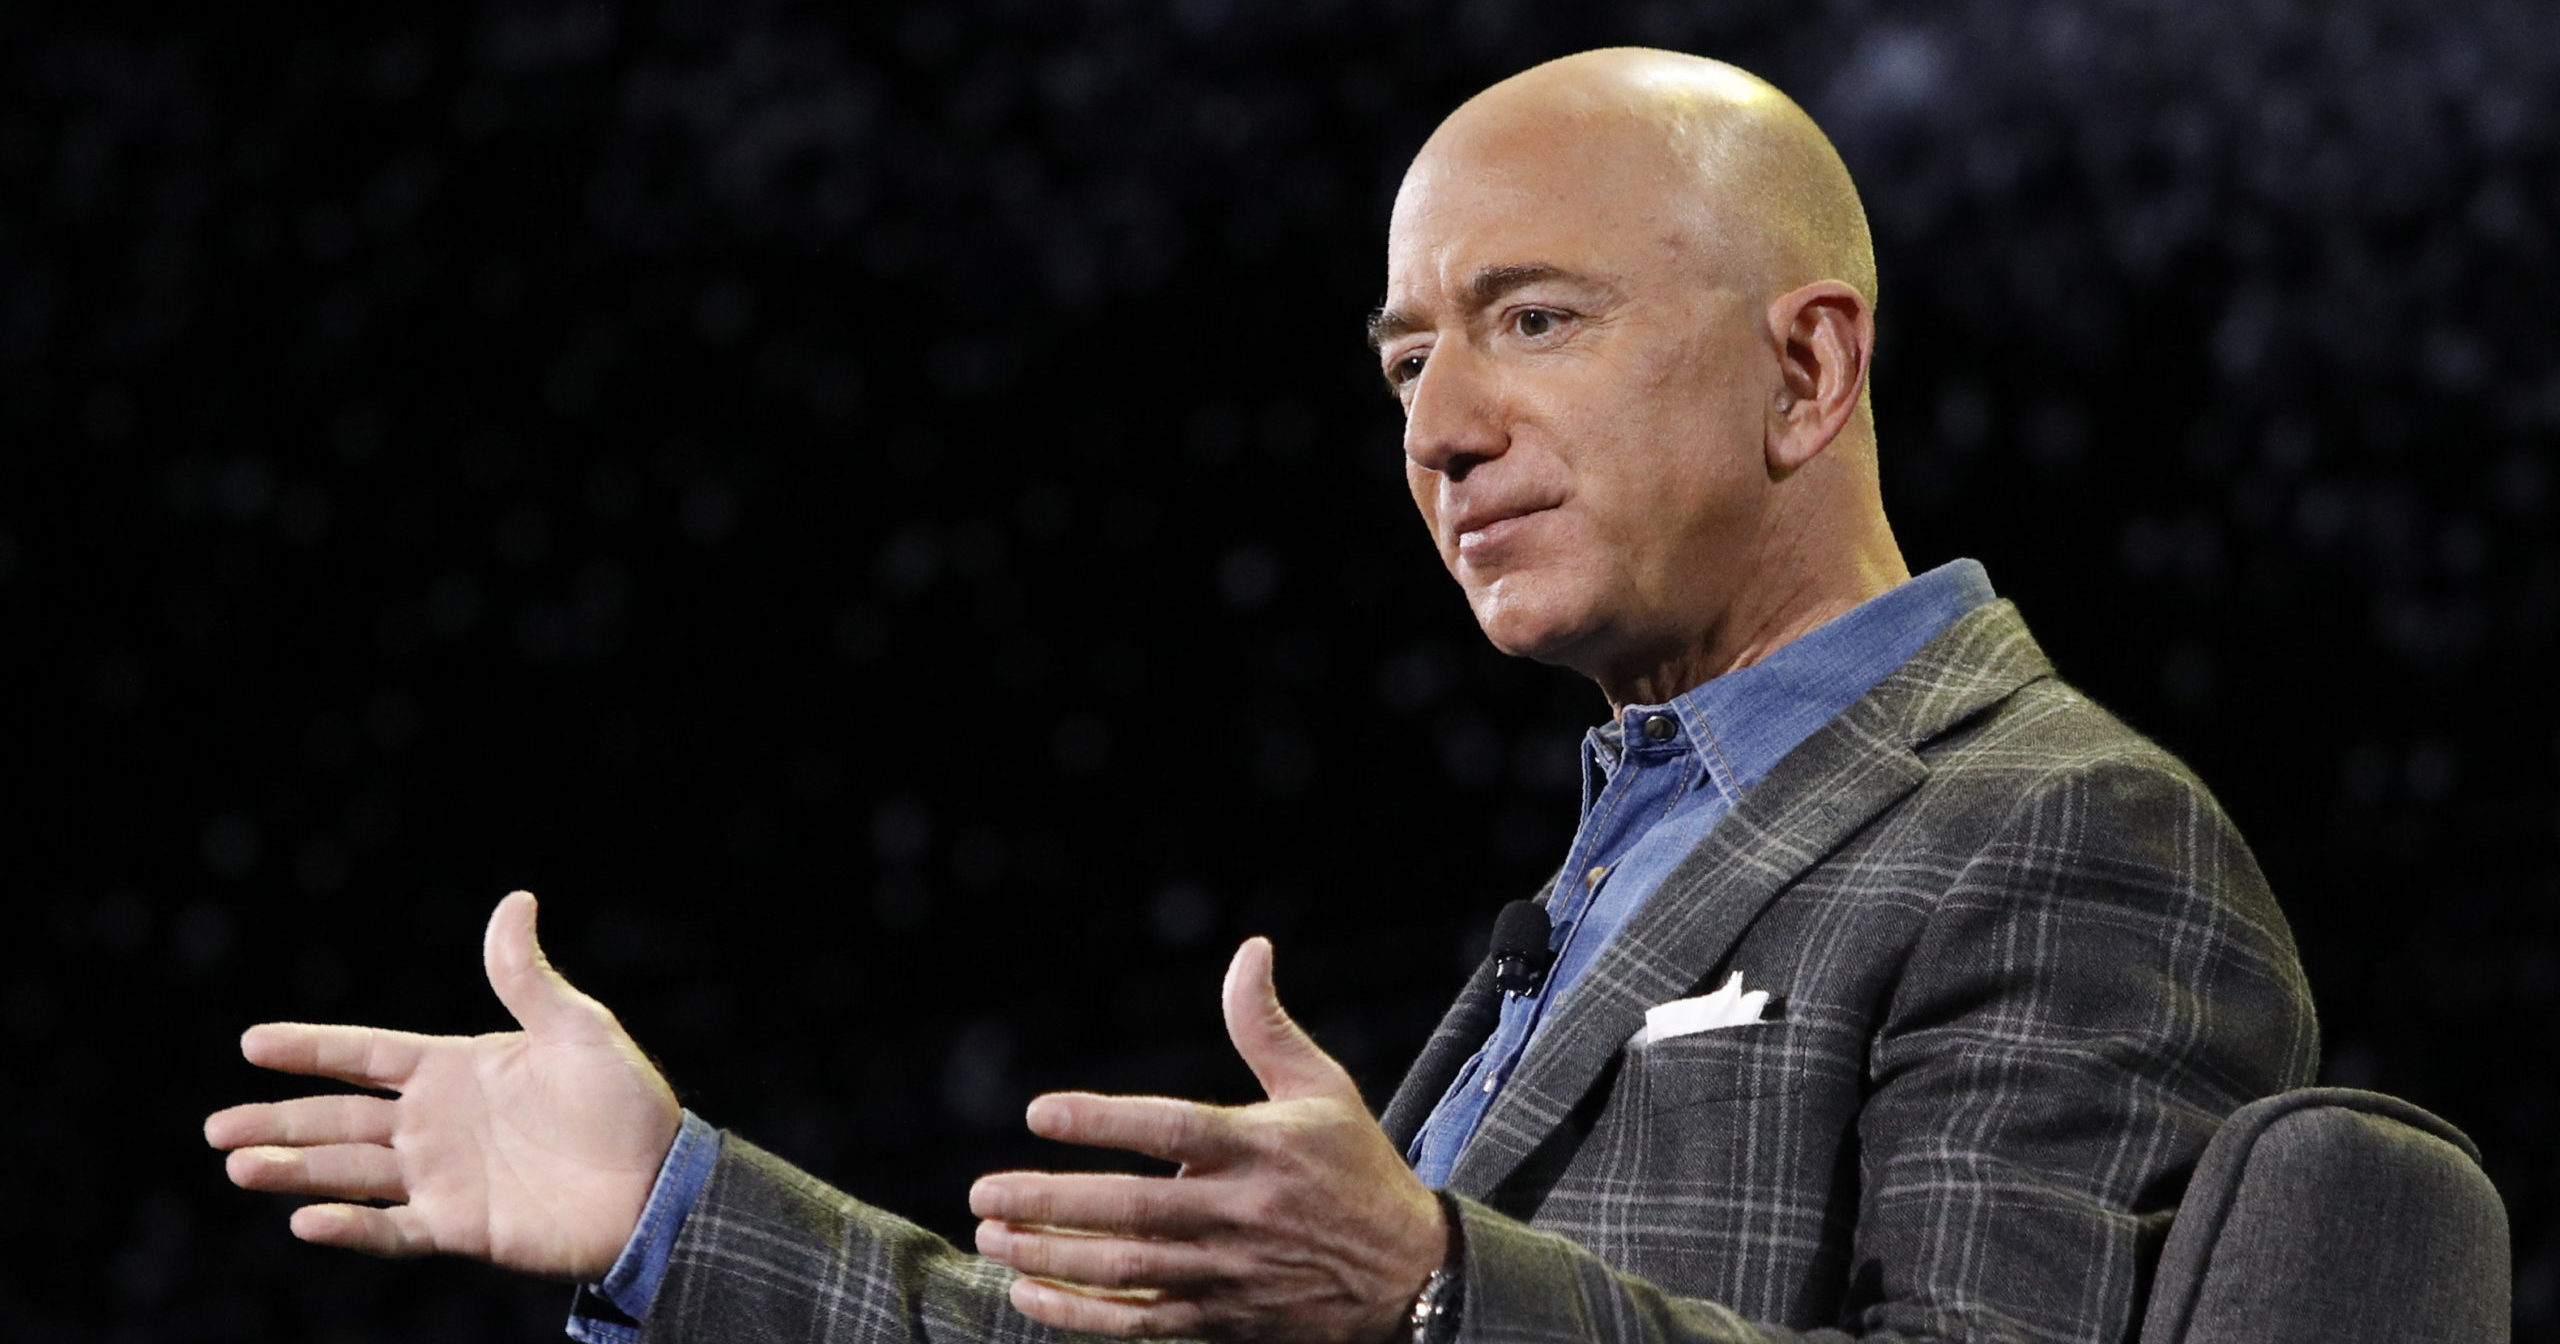 Amazon CEO Jeff Bezos speaks at a convention in Las Vegas on June 6, 2019.